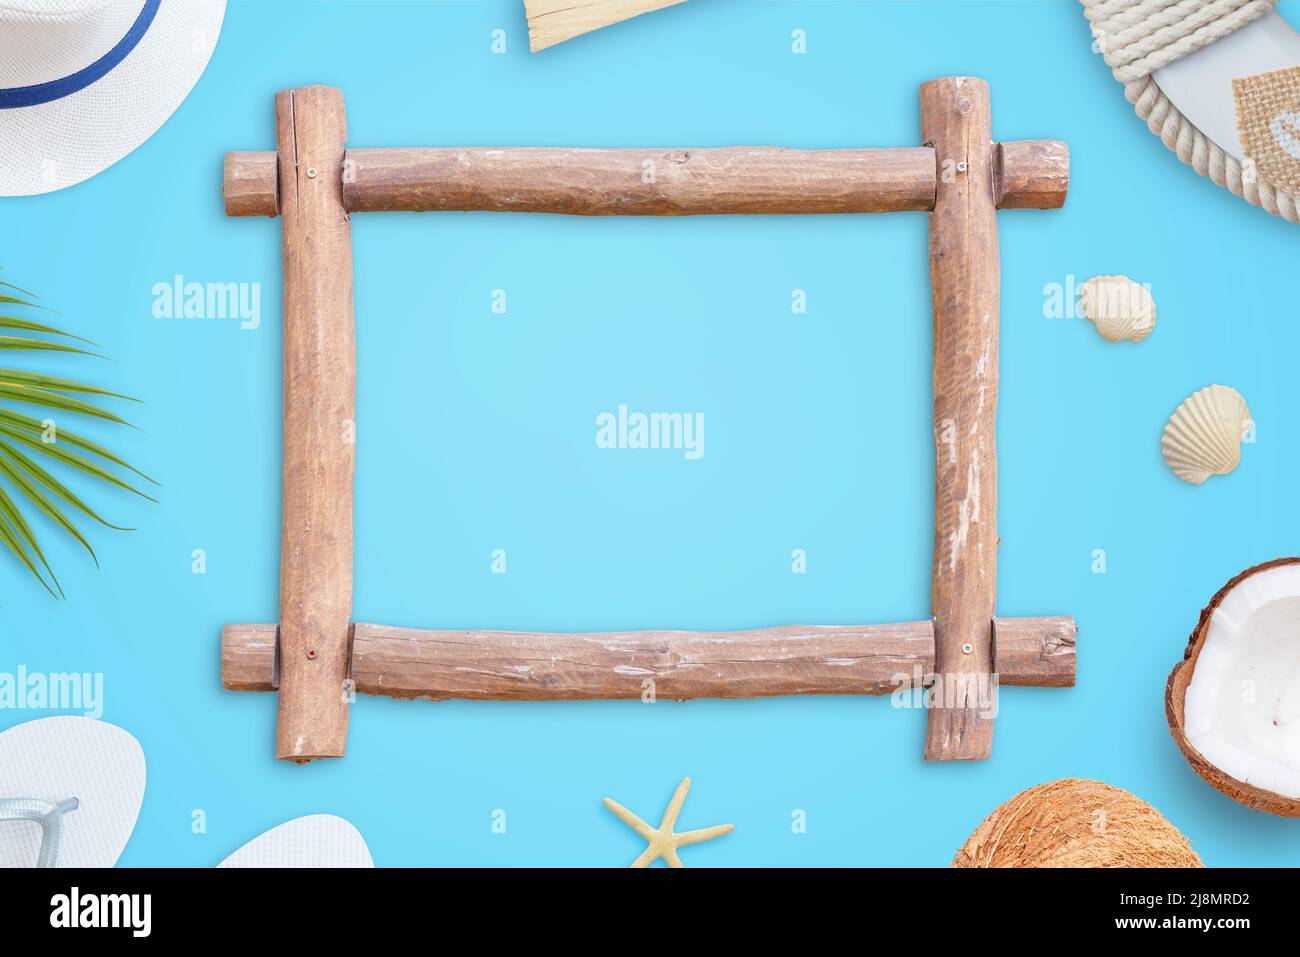 Wooden frame on blue surface. Summer travel concept. Top view, flat lay composition. Free space in the frame for text promotion Stock Photo